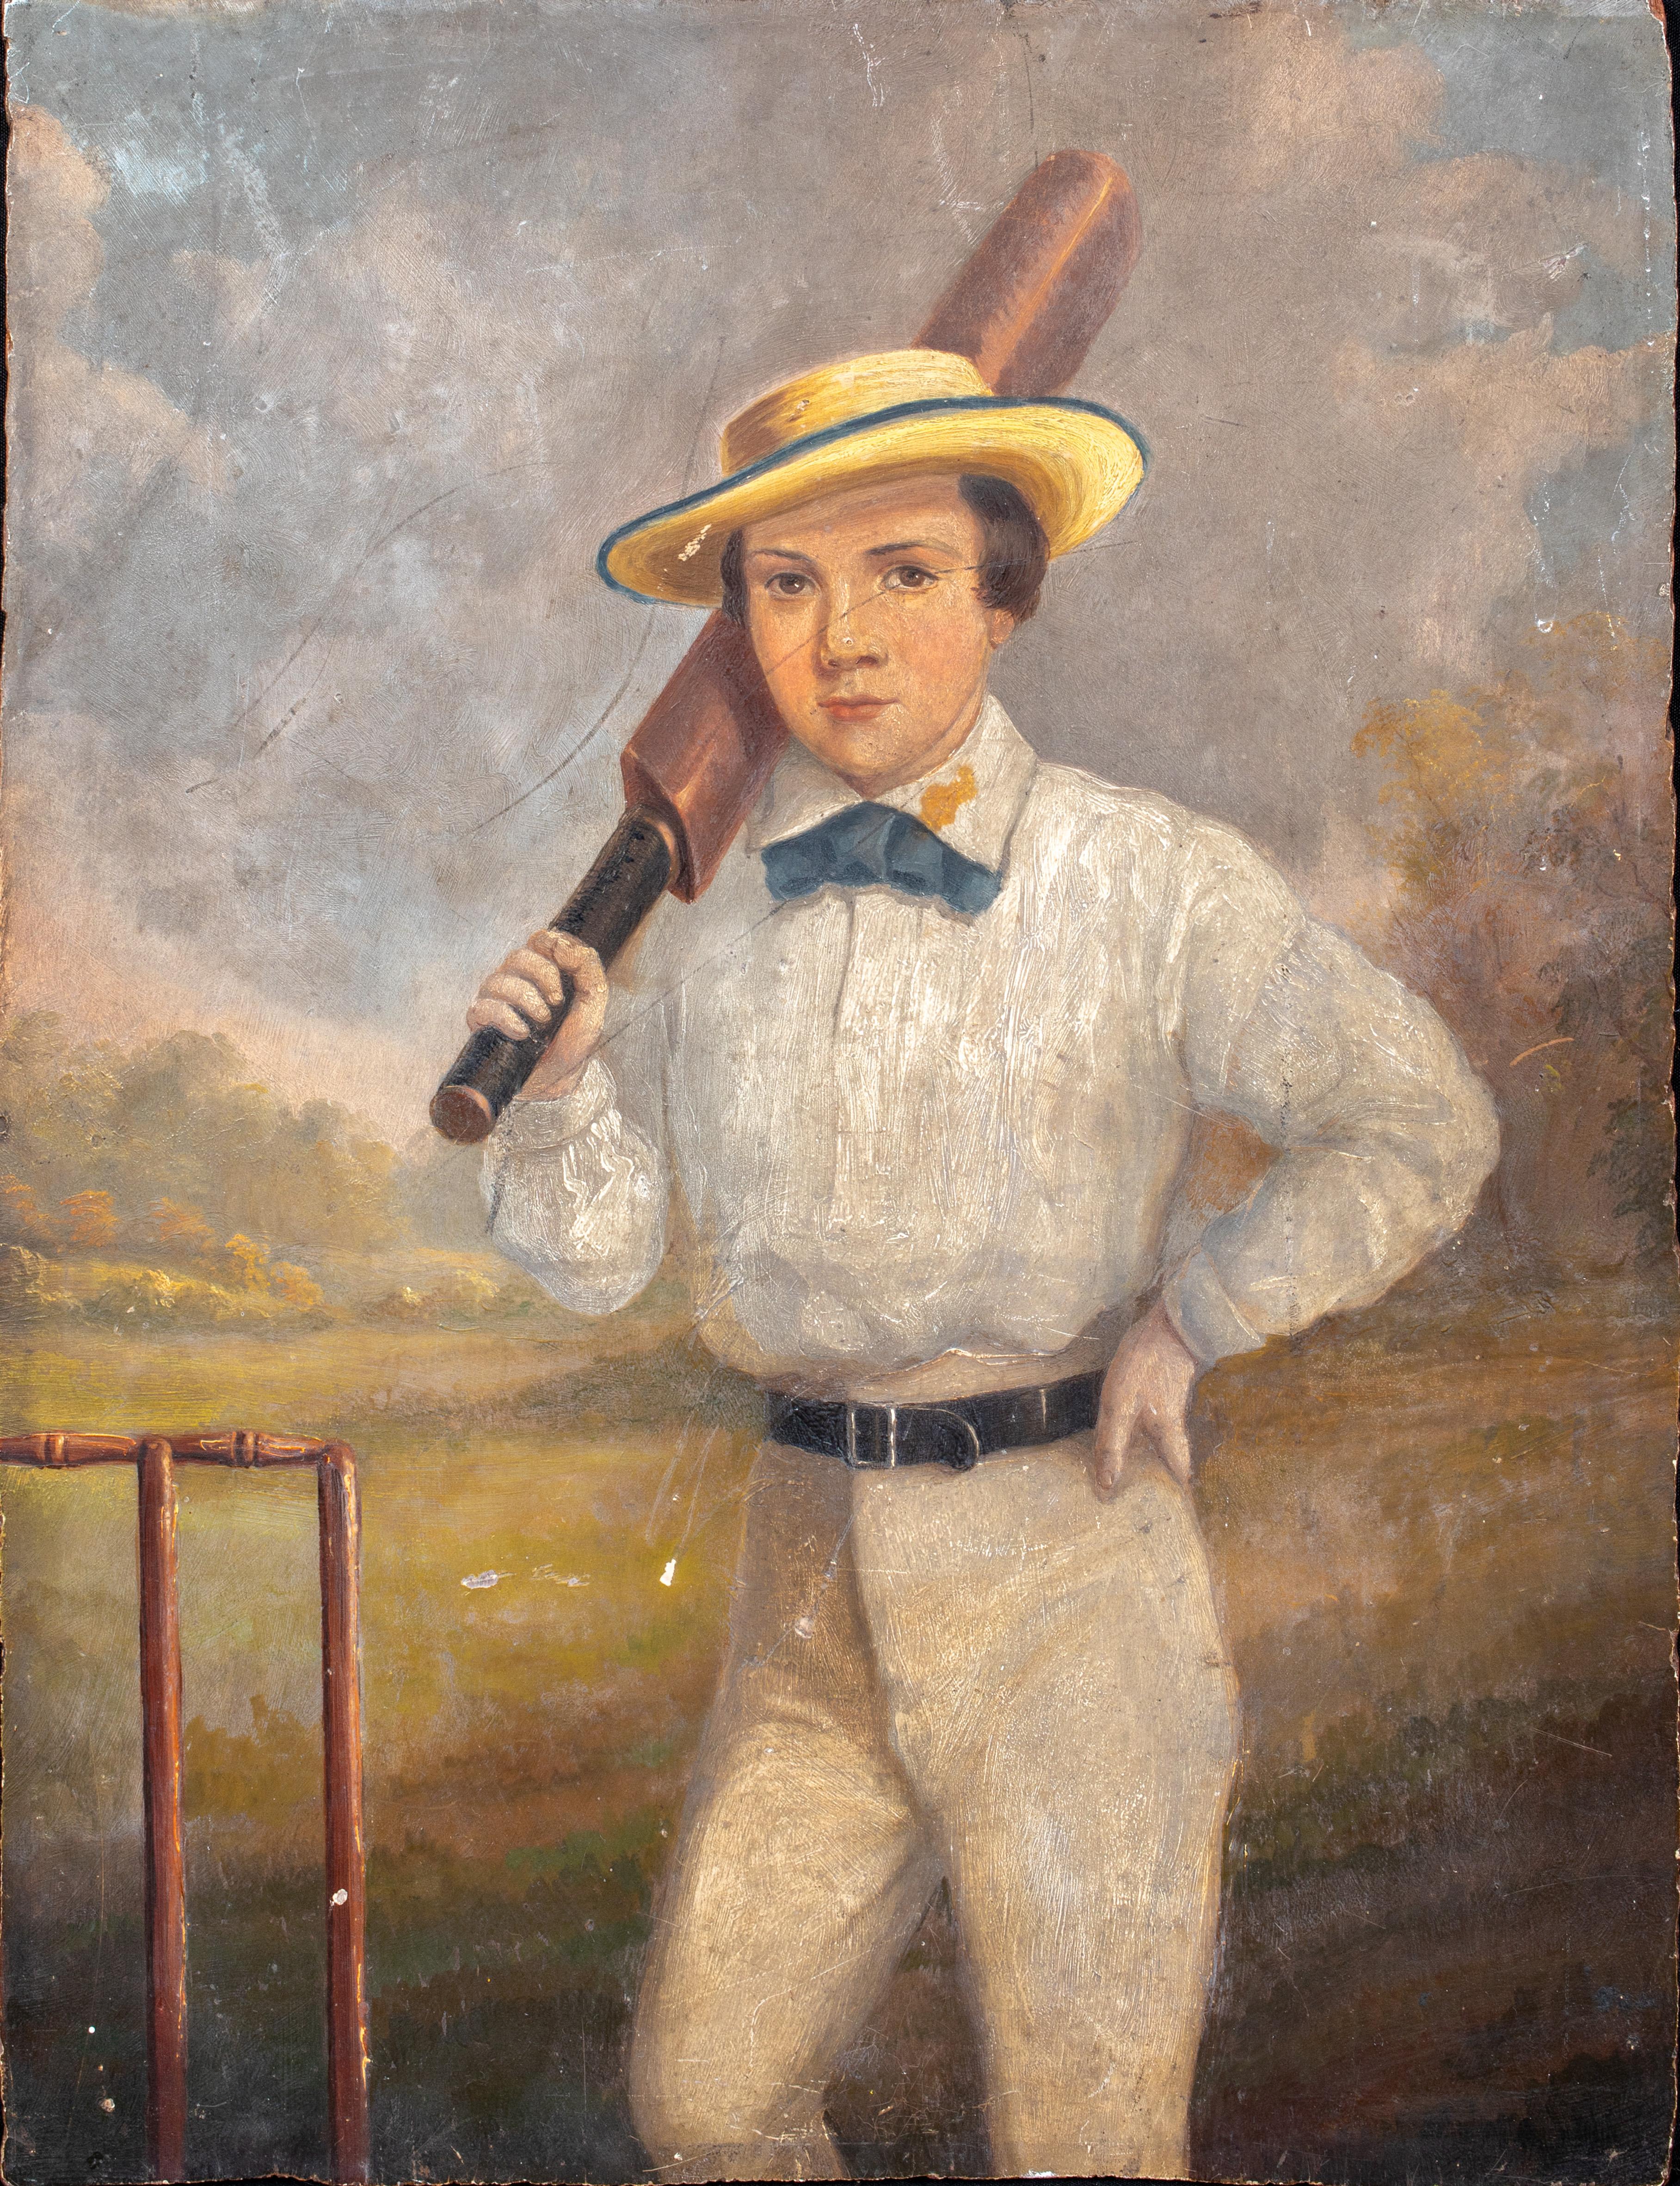 Unknown Portrait Painting - The Young Cricketer, 19th Century  English School